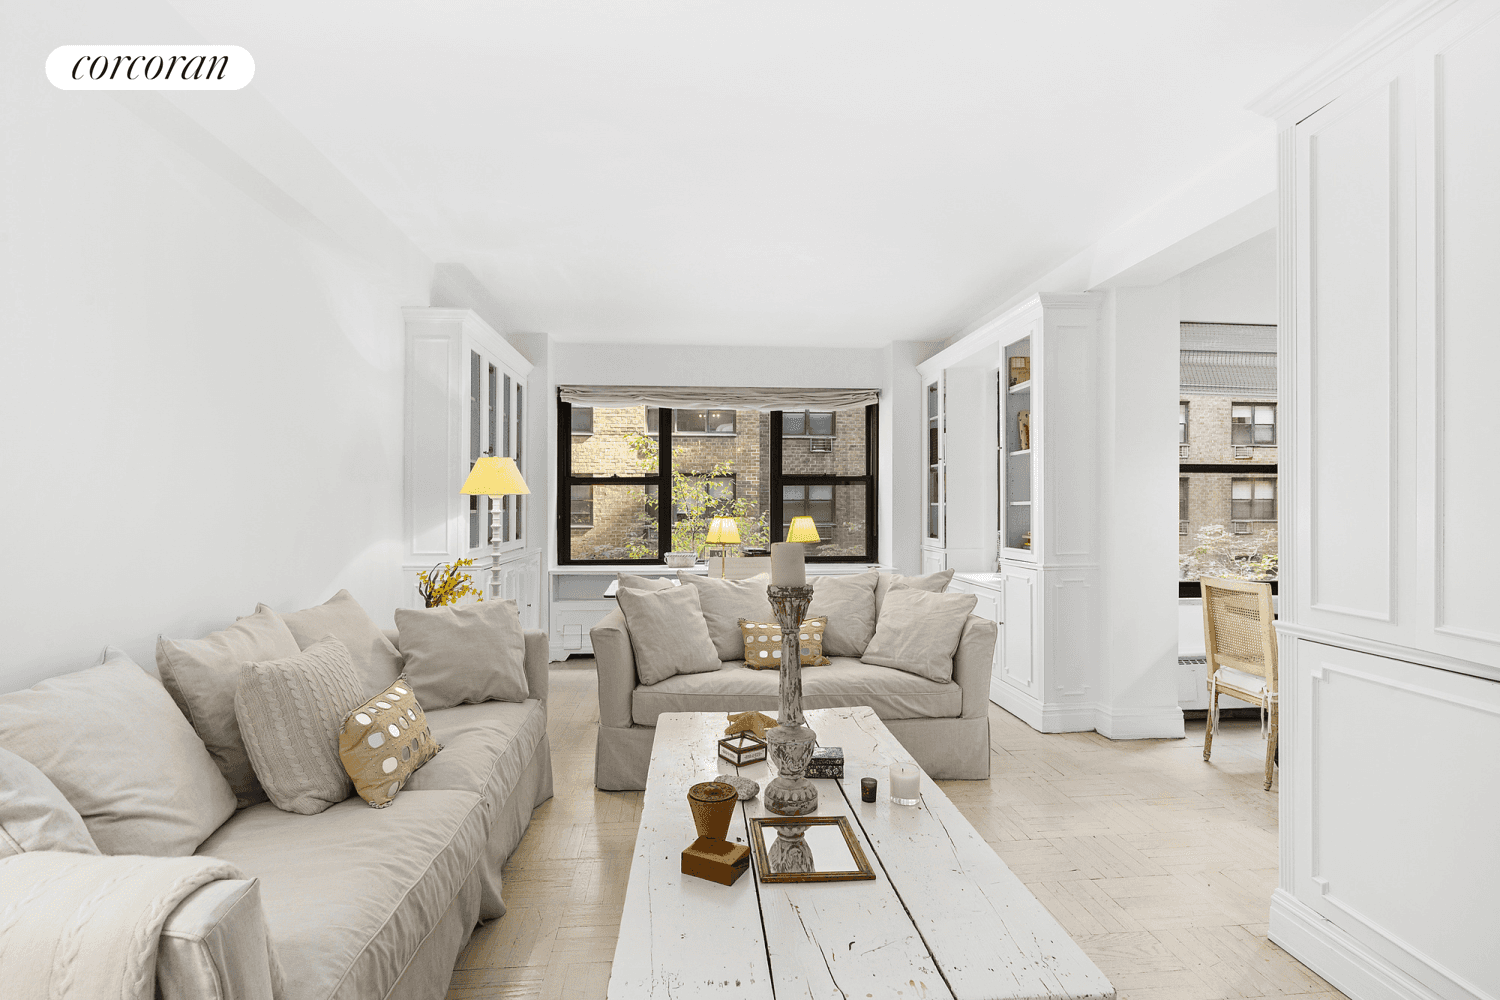 andjustlikethat a perfect one bedroom listing has come to market in the coveted 2 Tudor City Place co op in Manhattan's Tudor City.